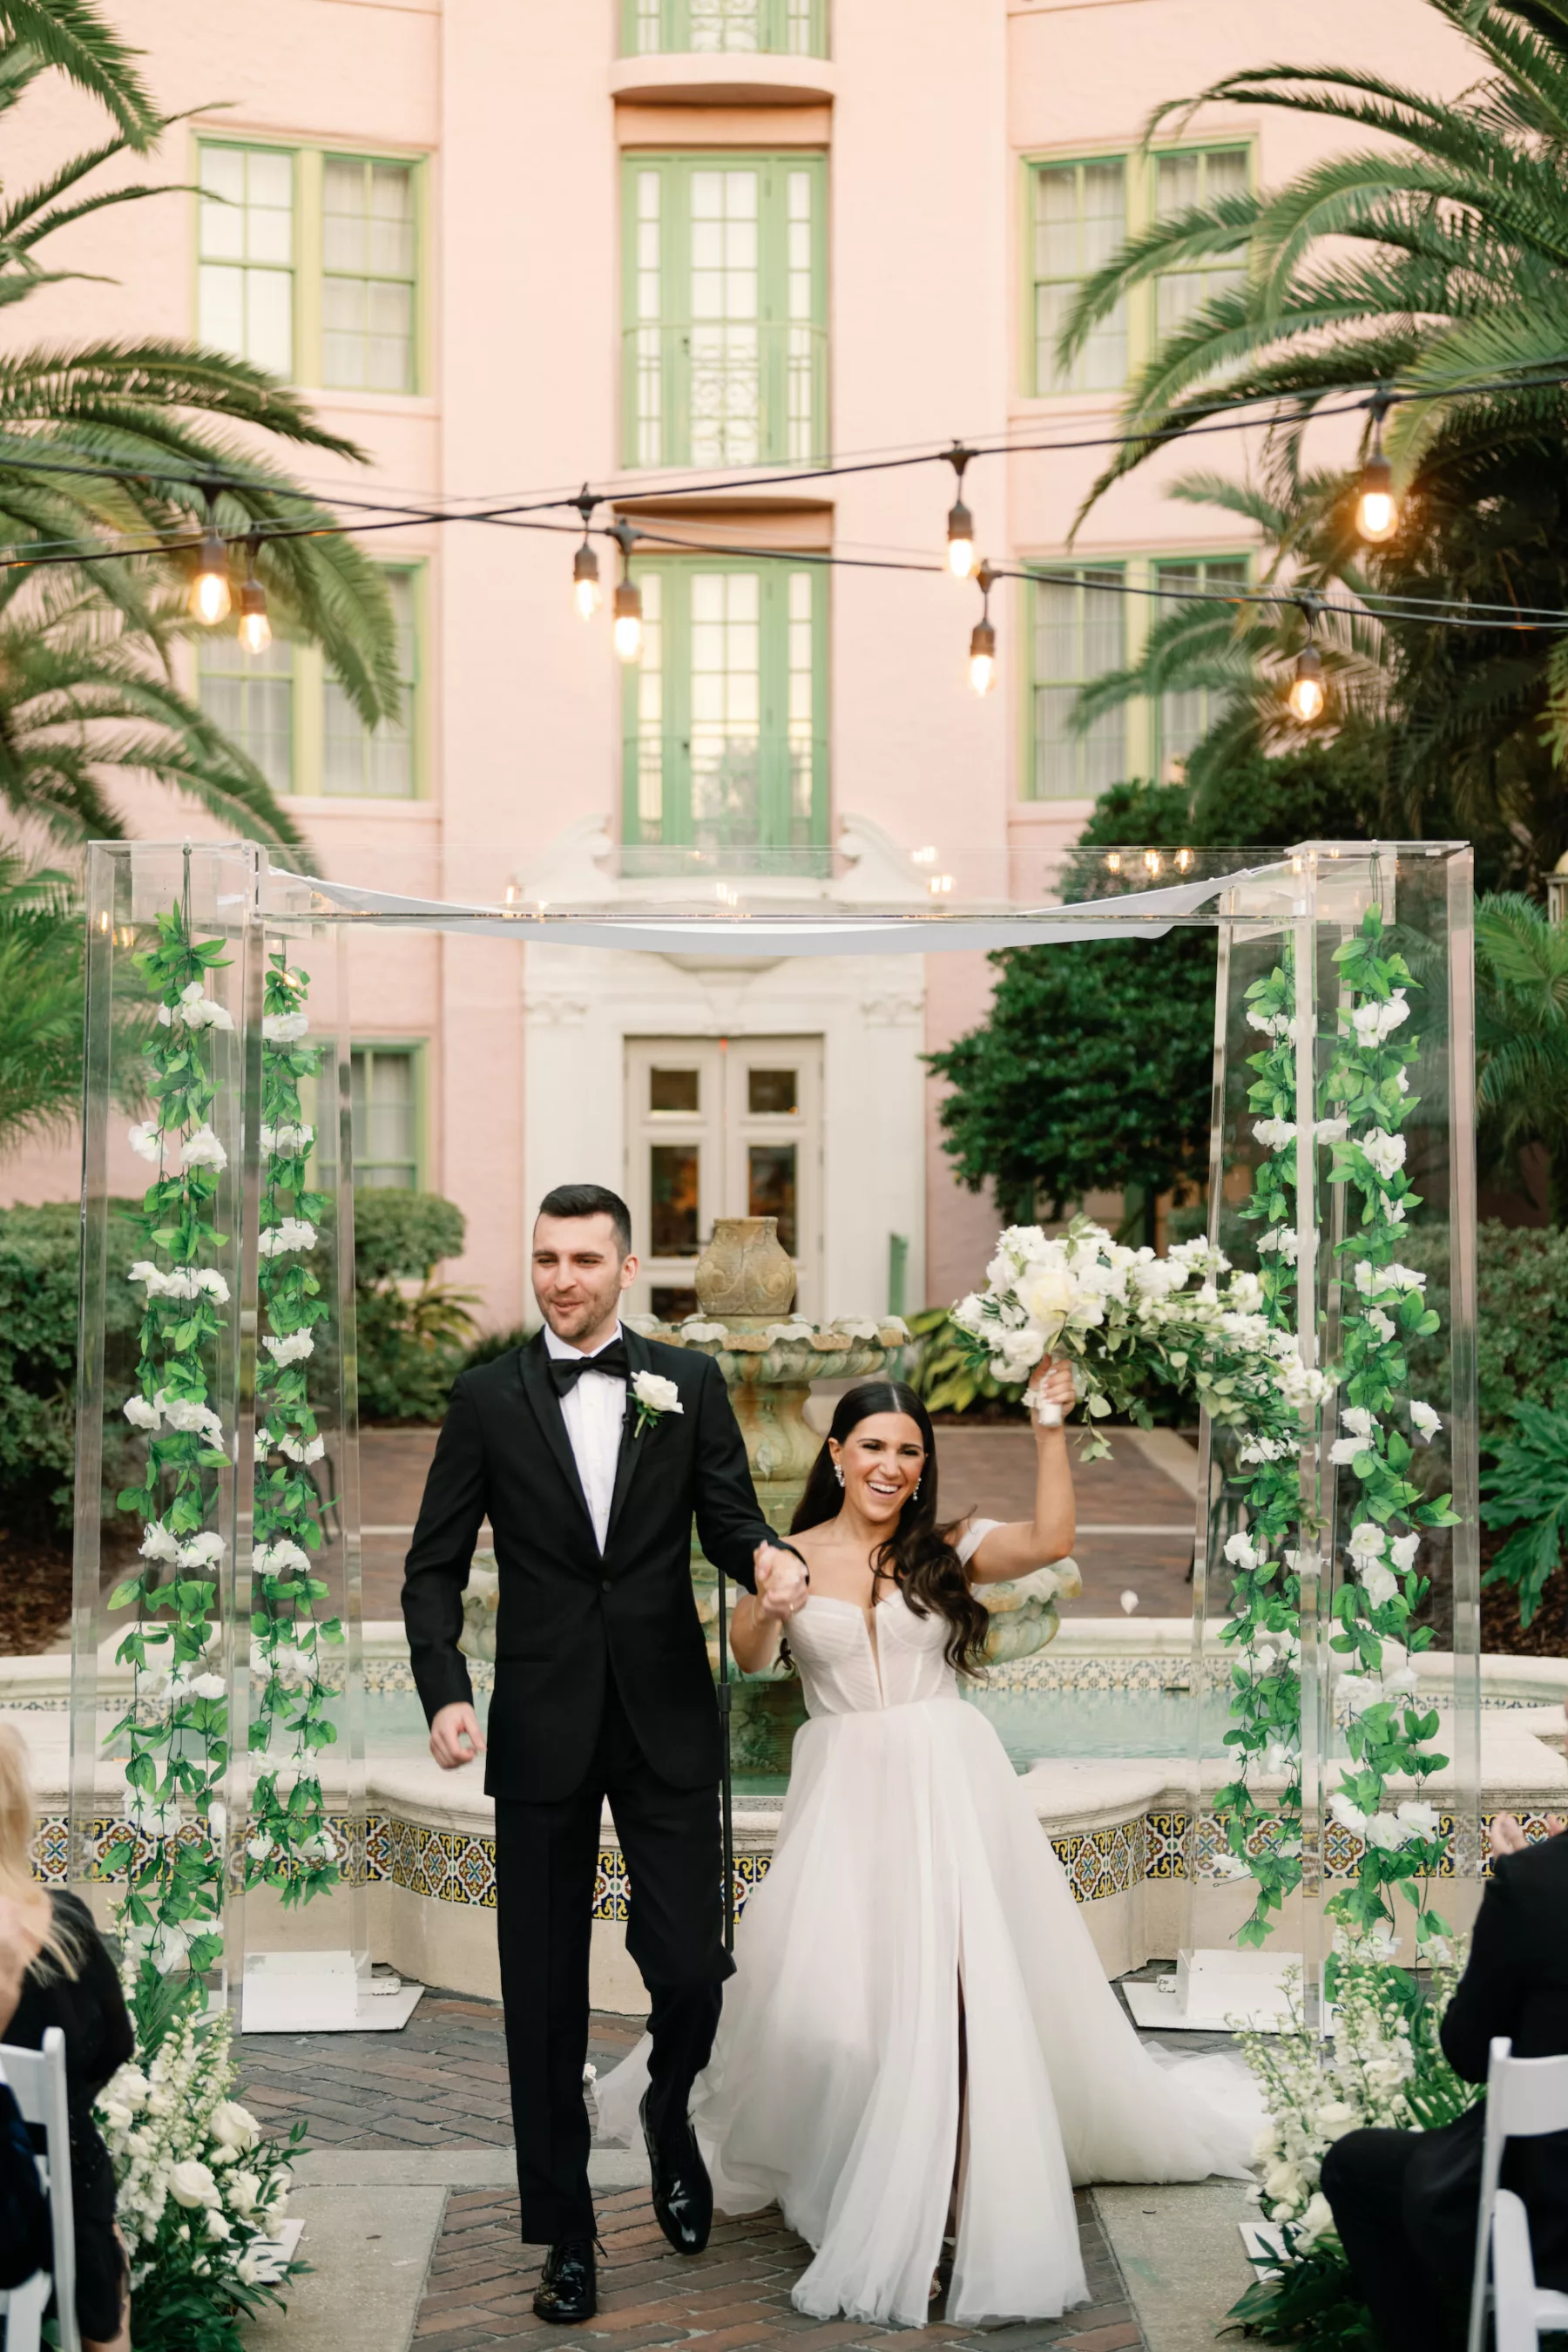 Modern Jewish Wedding Ceremony Inspiration | Acrylic Chuppah with White Rose and Greenery Garland Decor Ideas | Tampa Bay Photographer Dewitt For Love | St Pete Content Creator Behind The Vows